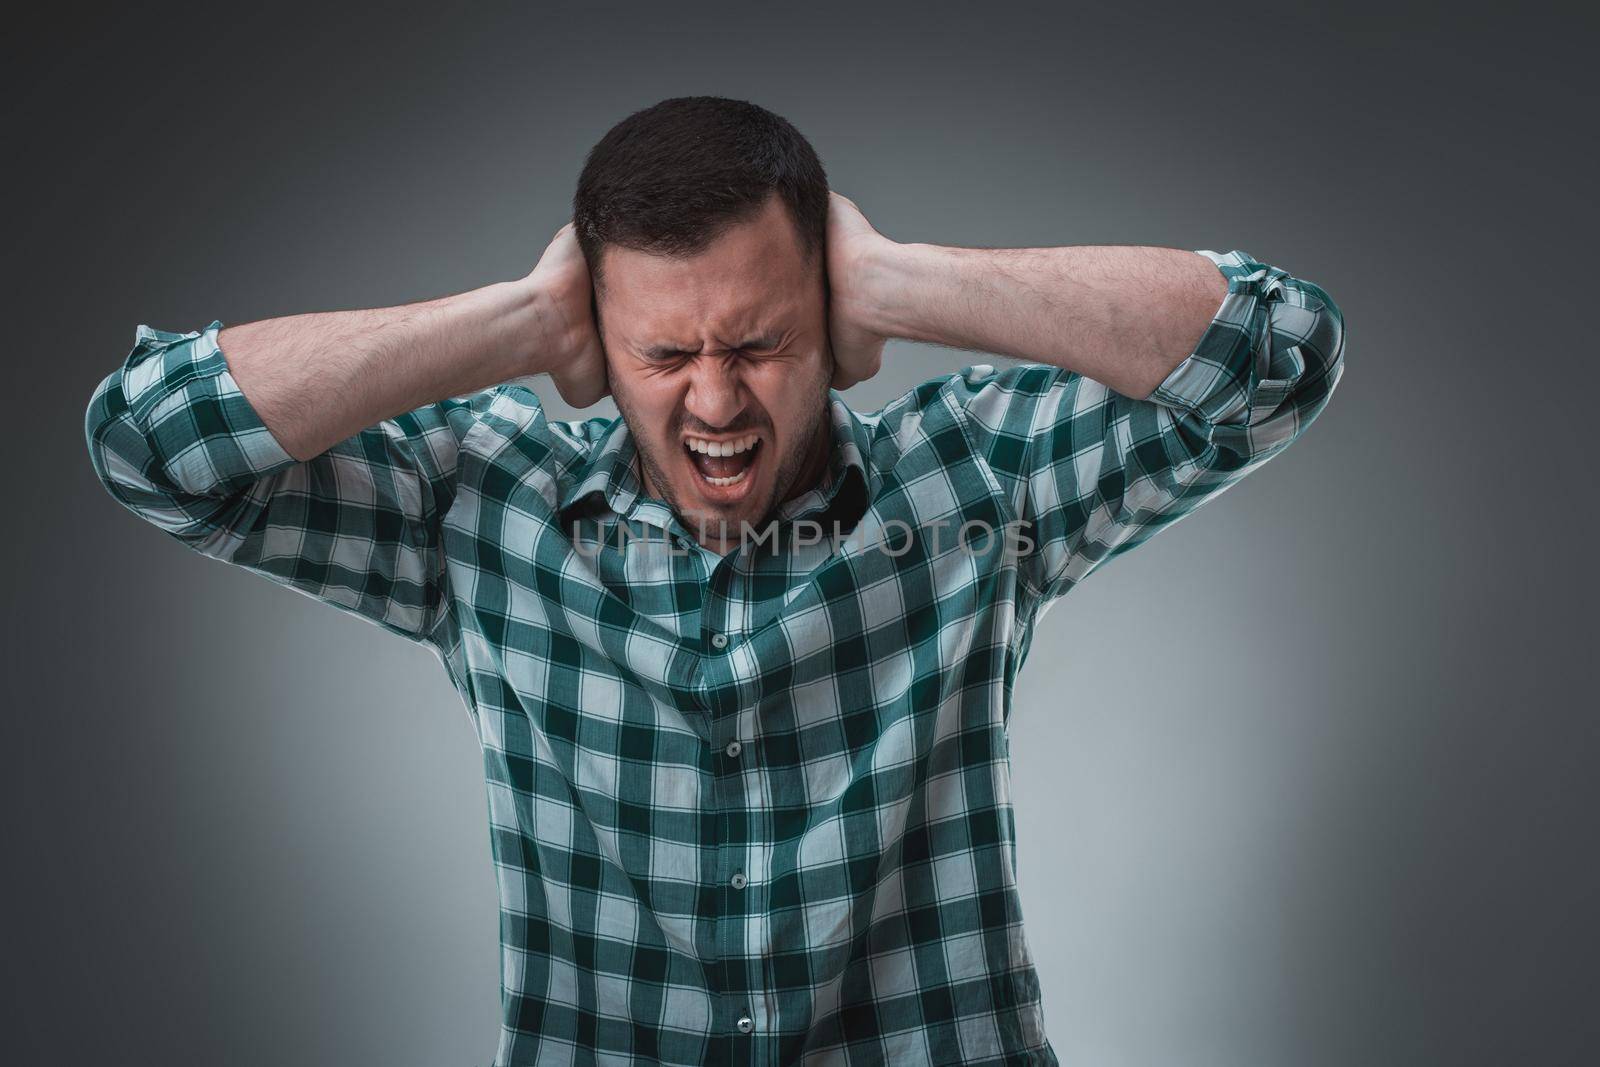 Stop that loud noise! Standing plain young man sad and depressed suffering sorrow and pain screaming desperate with hands on face against grey background. Sadness emotion concept